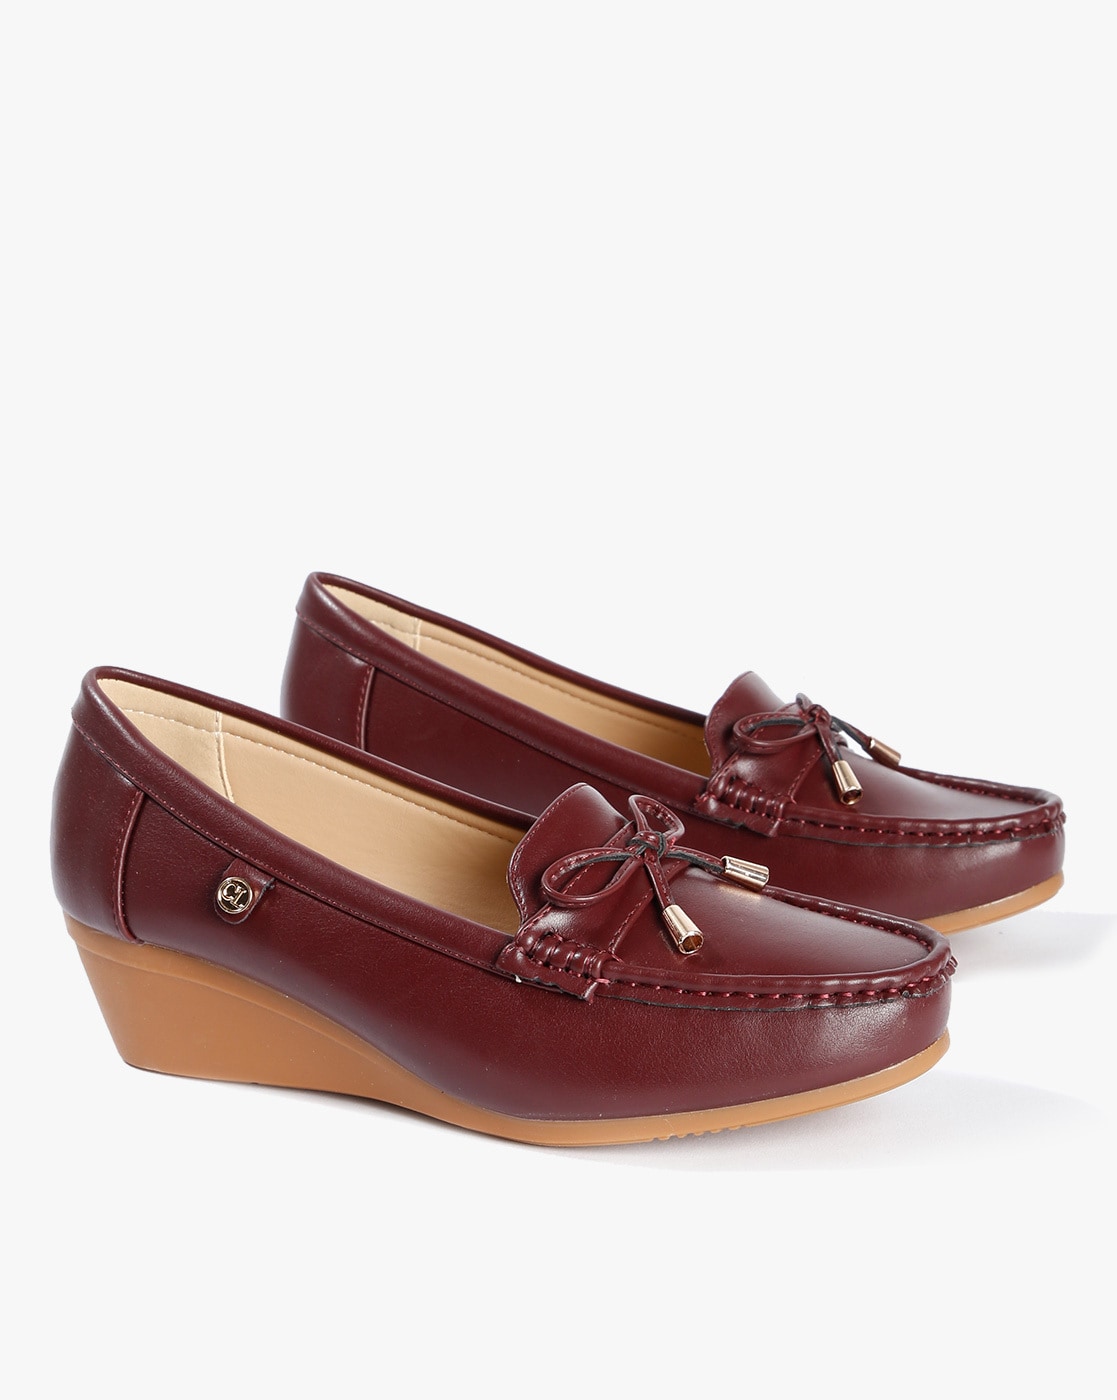 Buy Burgundy Heeled Shoes for Women by 